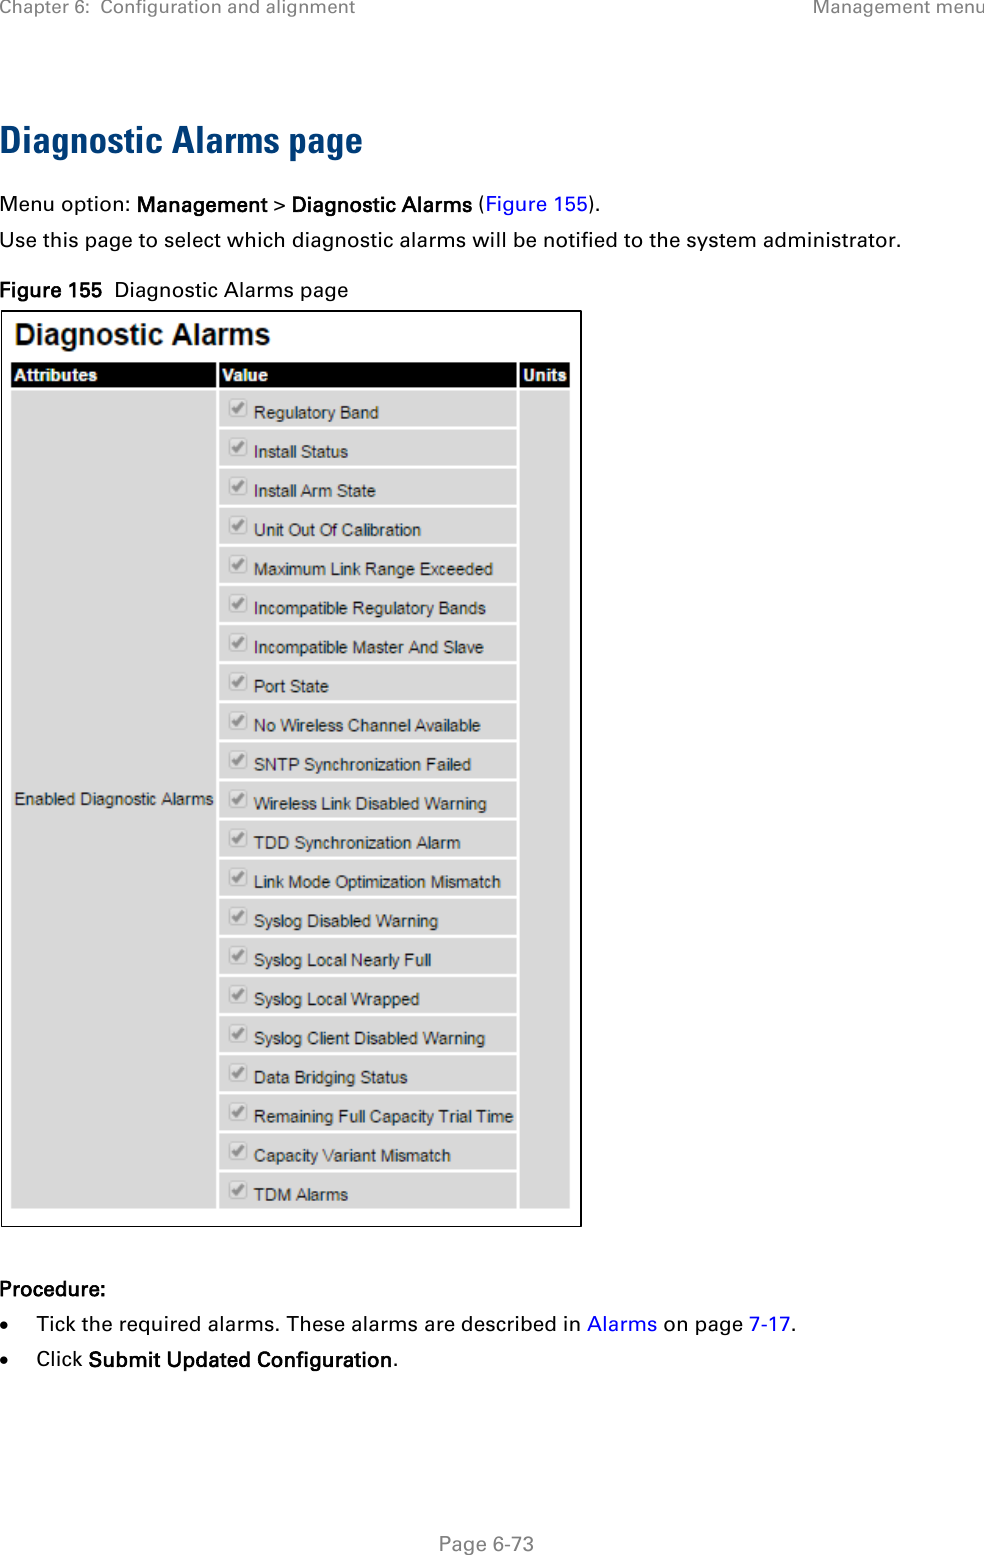 Chapter 6:  Configuration and alignment Management menu  Diagnostic Alarms page Menu option: Management &gt; Diagnostic Alarms (Figure 155). Use this page to select which diagnostic alarms will be notified to the system administrator. Figure 155  Diagnostic Alarms page   Procedure: • Tick the required alarms. These alarms are described in Alarms on page 7-17. • Click Submit Updated Configuration.   Page 6-73 